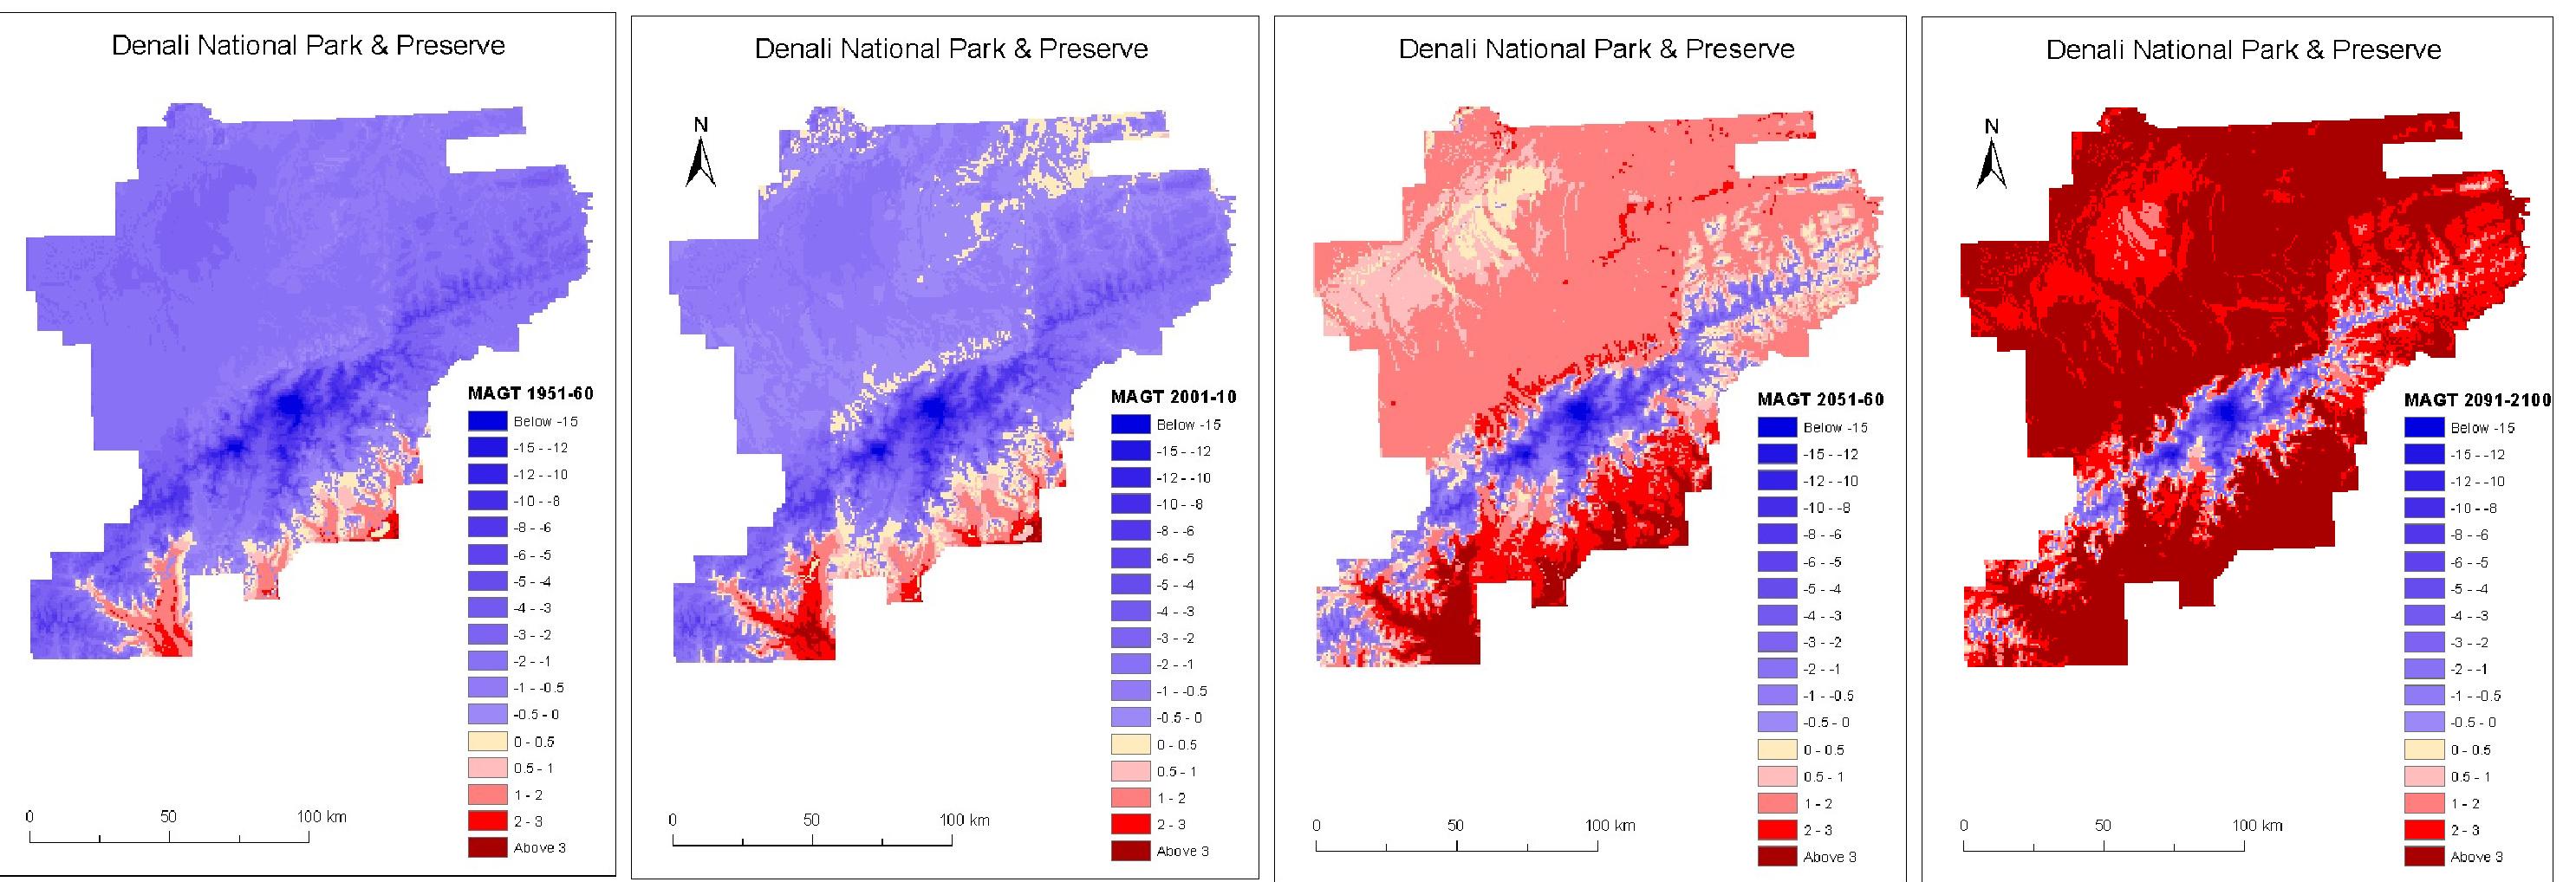 Permafrost changes in Denali, past and future